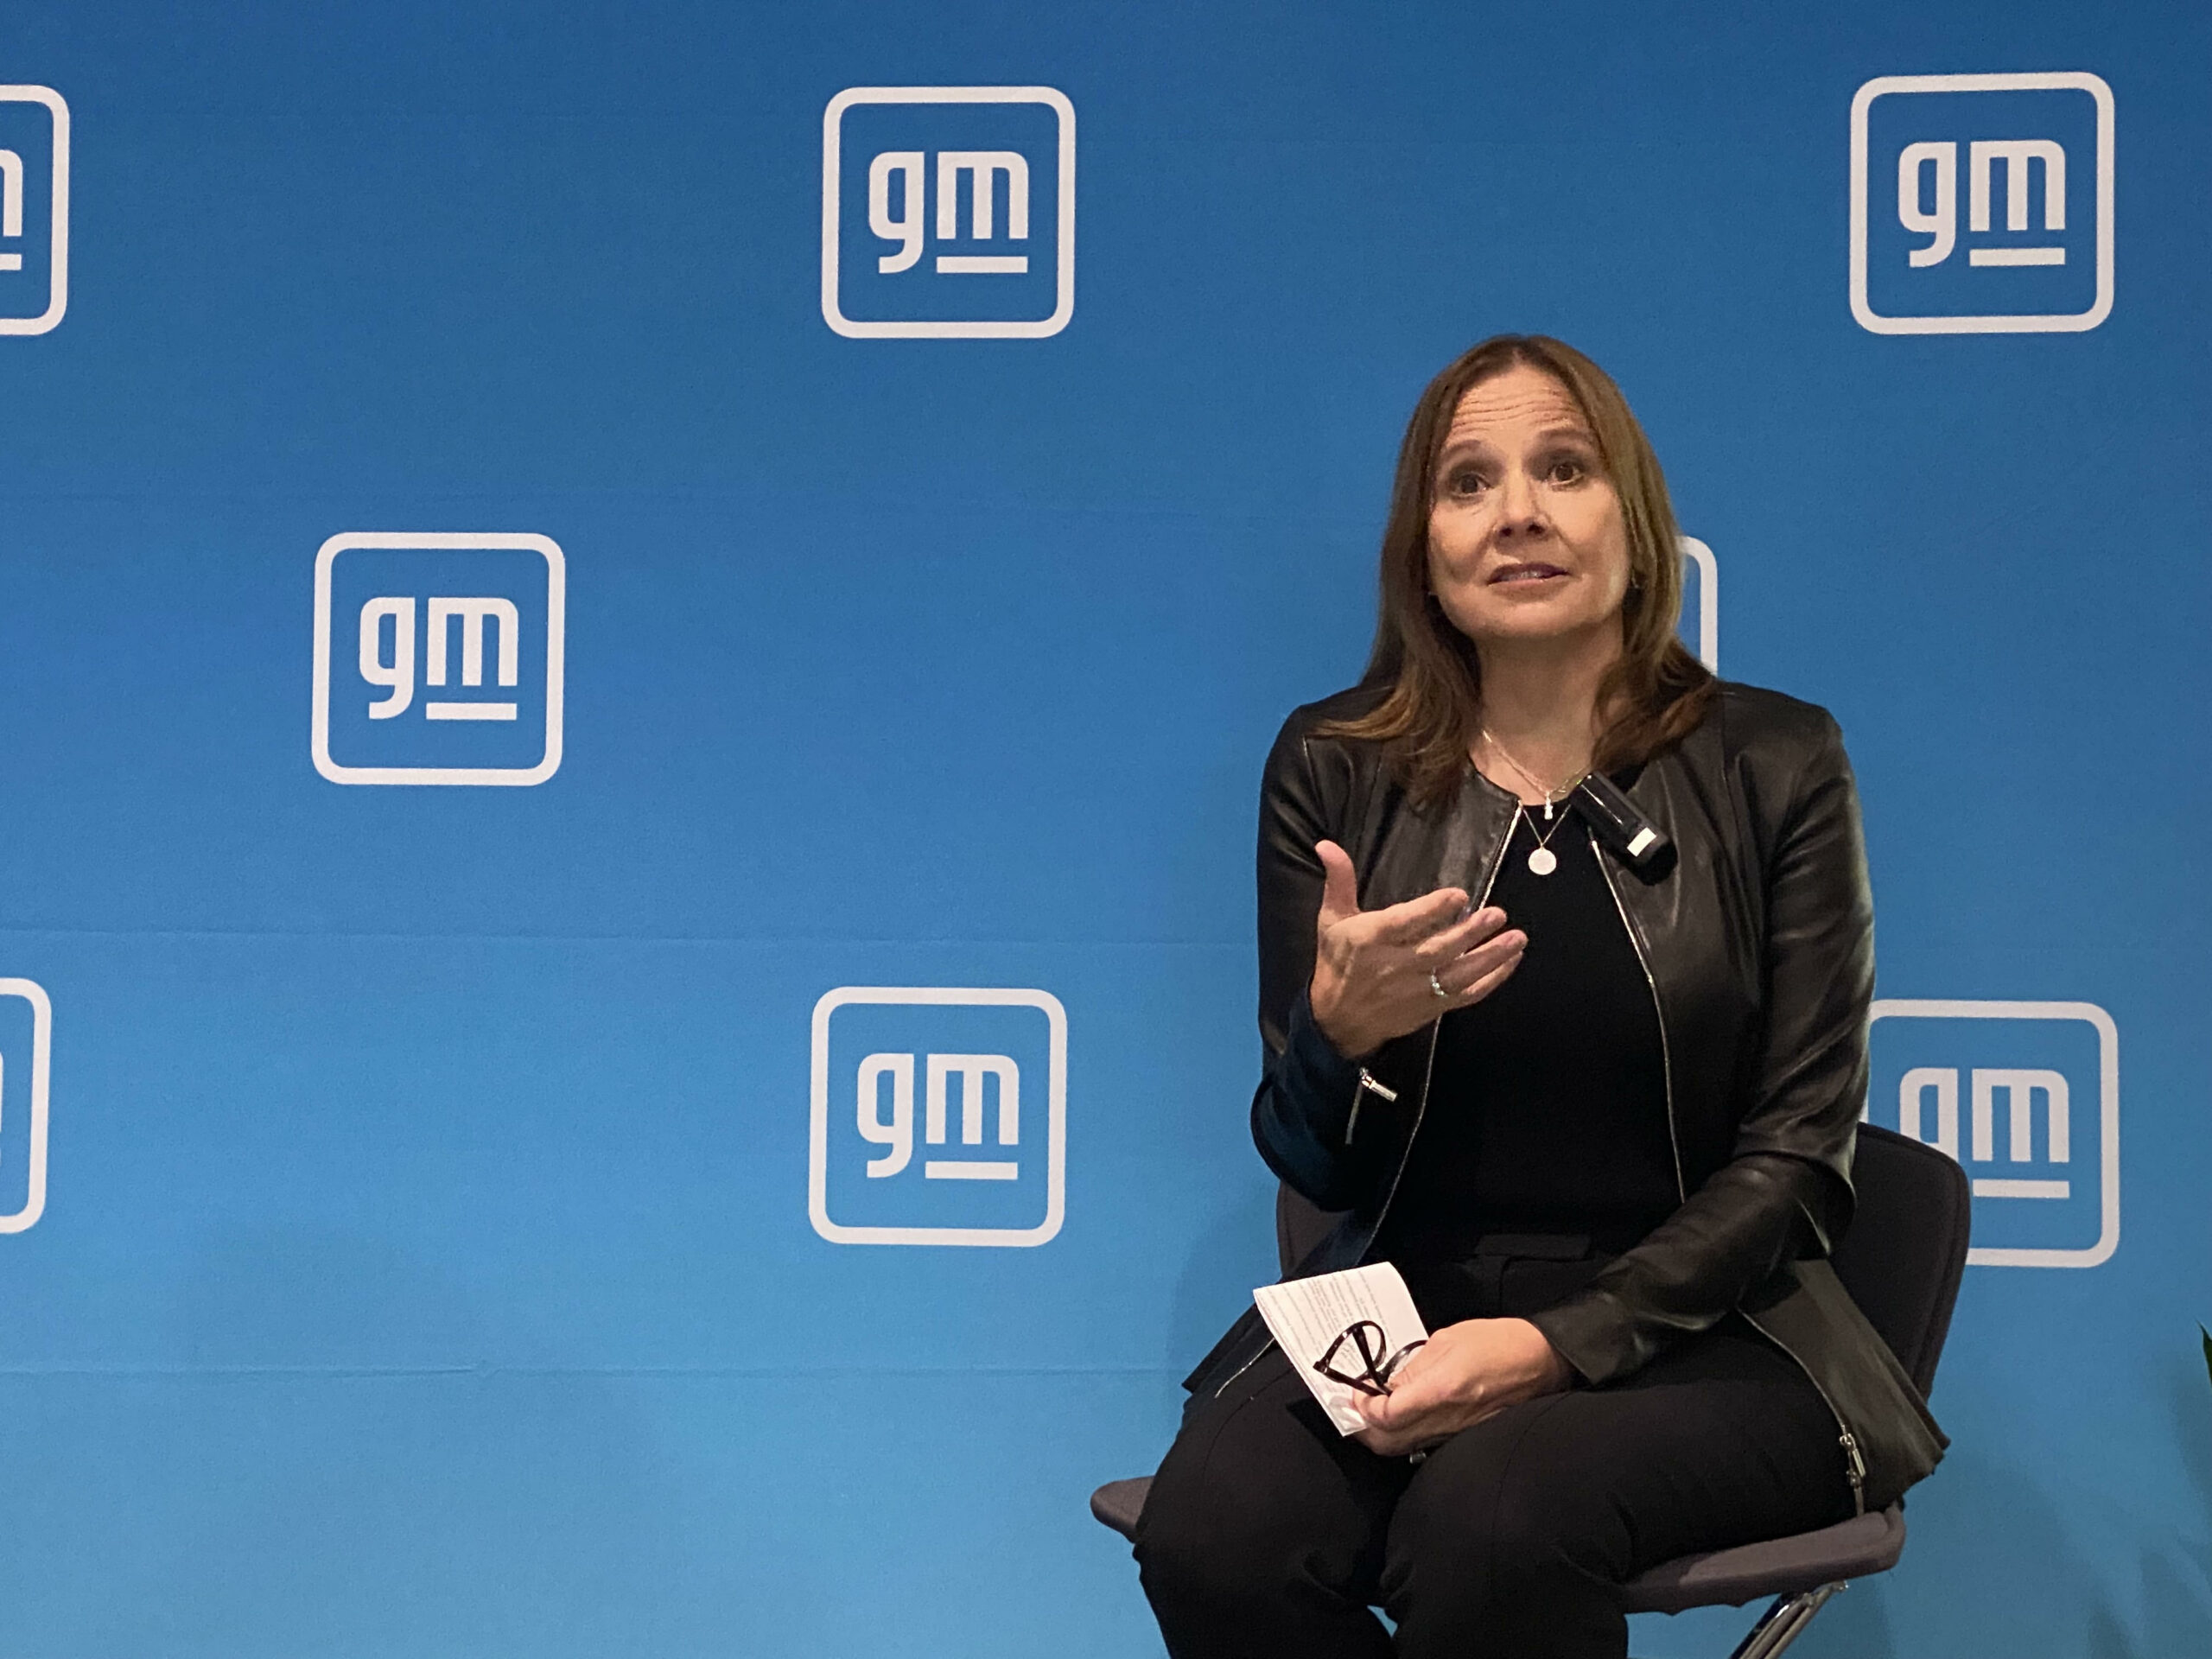 GM says it will double annual revenue by 2030 to $280 billion in digital push to be seen more like Tesla